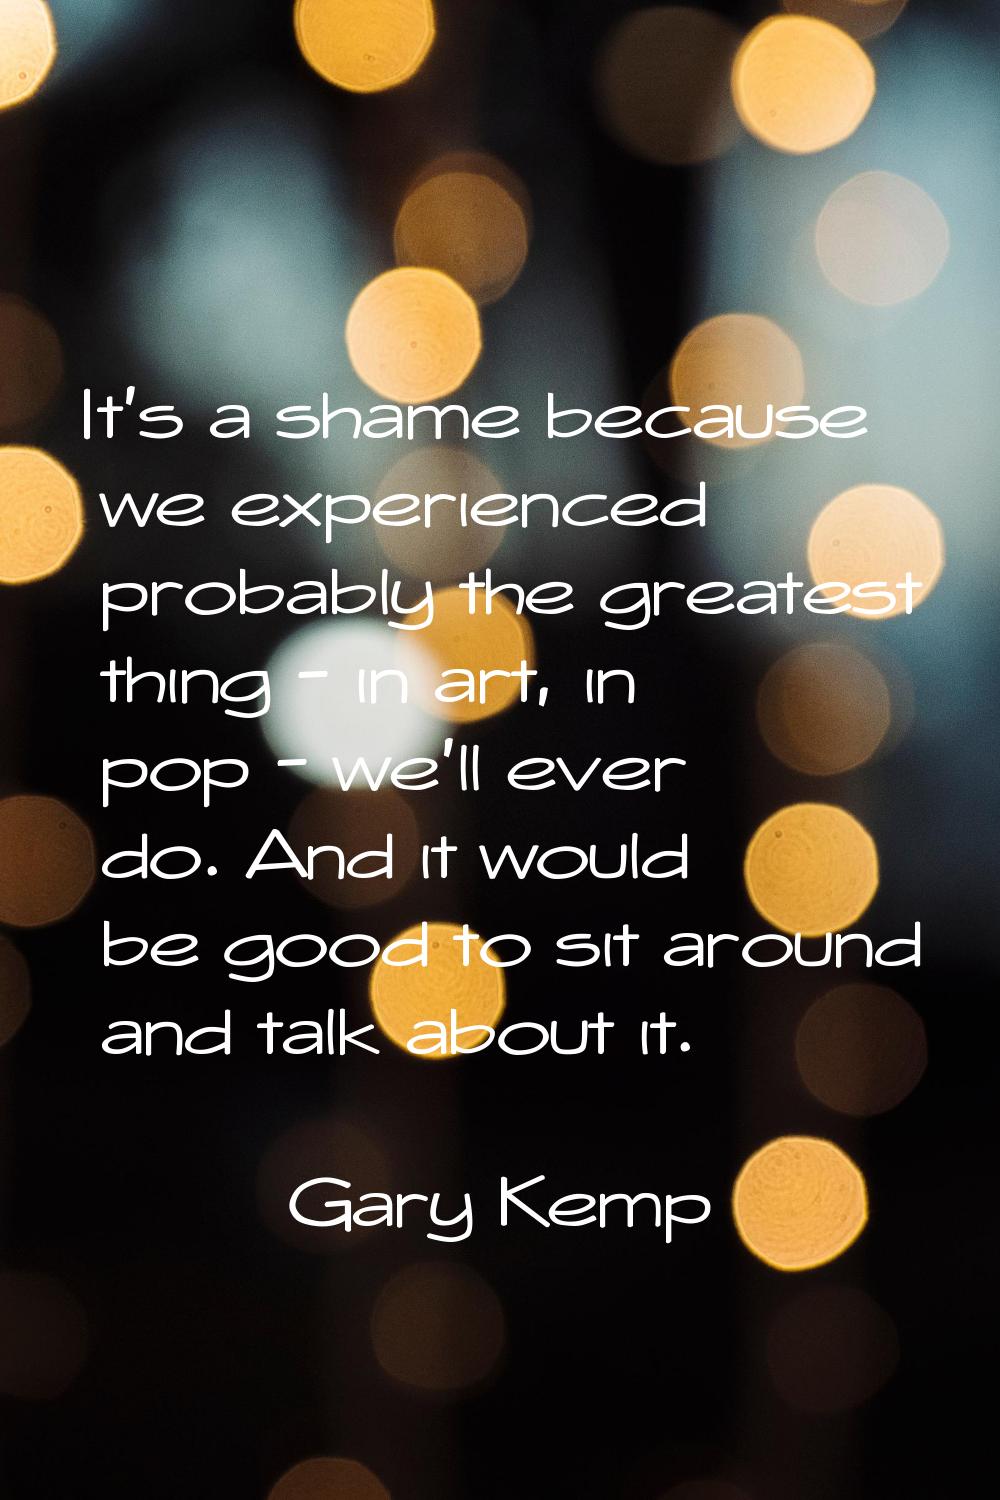 It's a shame because we experienced probably the greatest thing - in art, in pop - we'll ever do. A